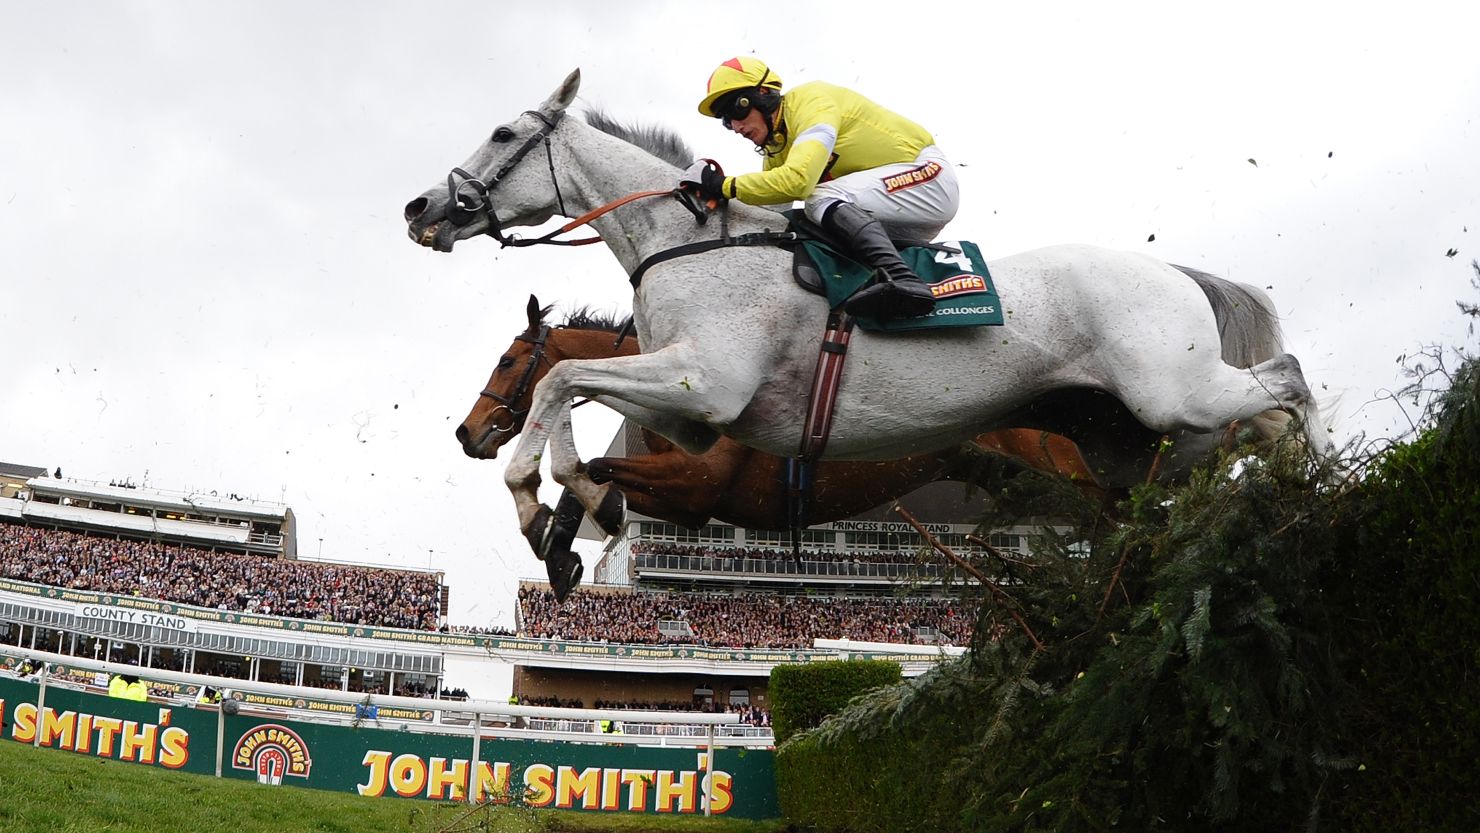 Neptune Collonges ridden by Daryl Jacob jumps the water jump during the Grand National at Aintree Racecourse in Liverpool, UK.